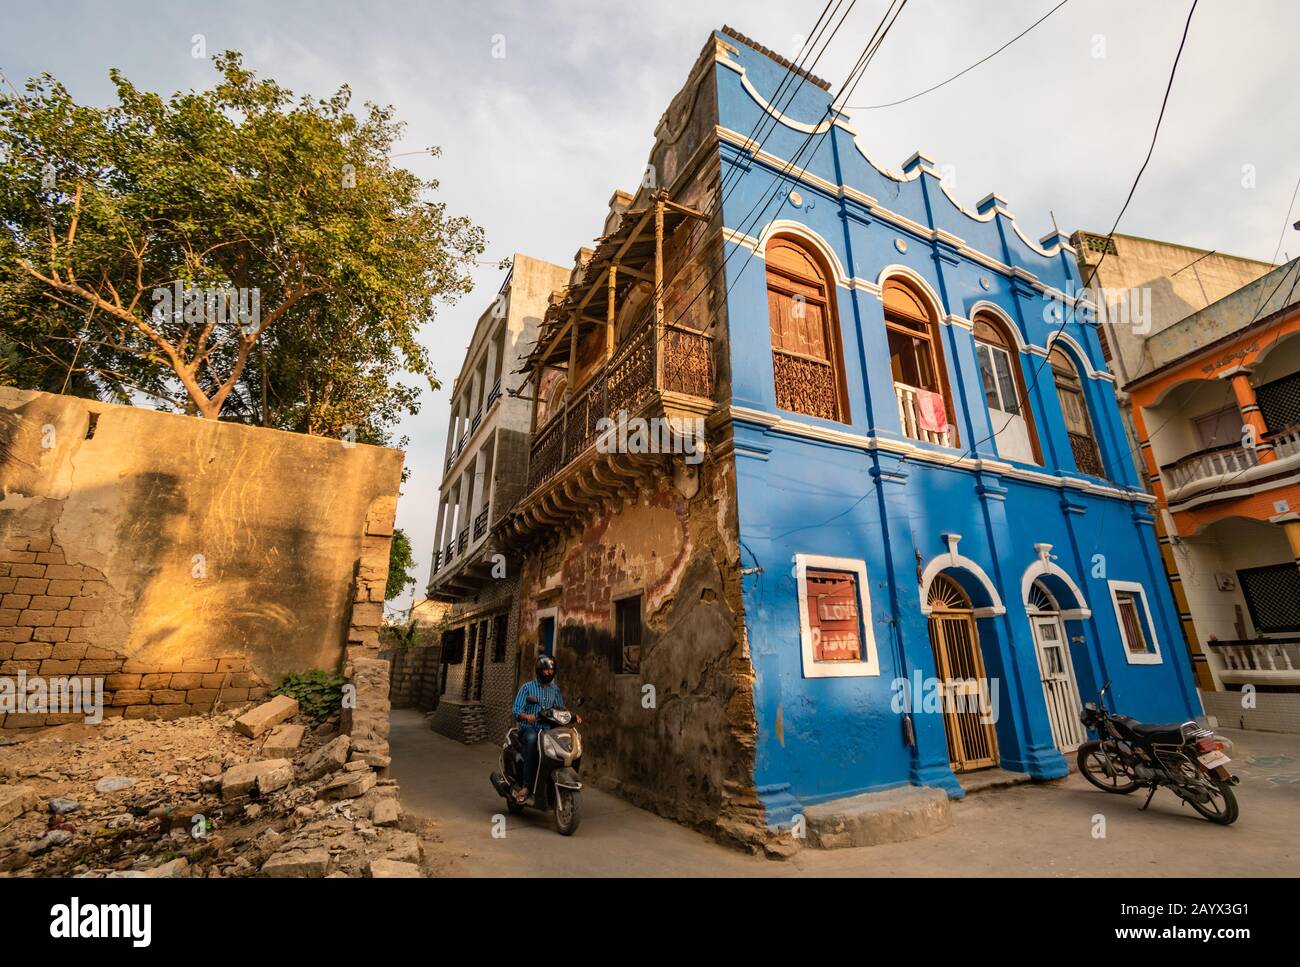 A man bikes through the narrow lanes of the old town of Diu. An old, colonial era house with blue walls and an ornate balcony looms over the street. Stock Photo